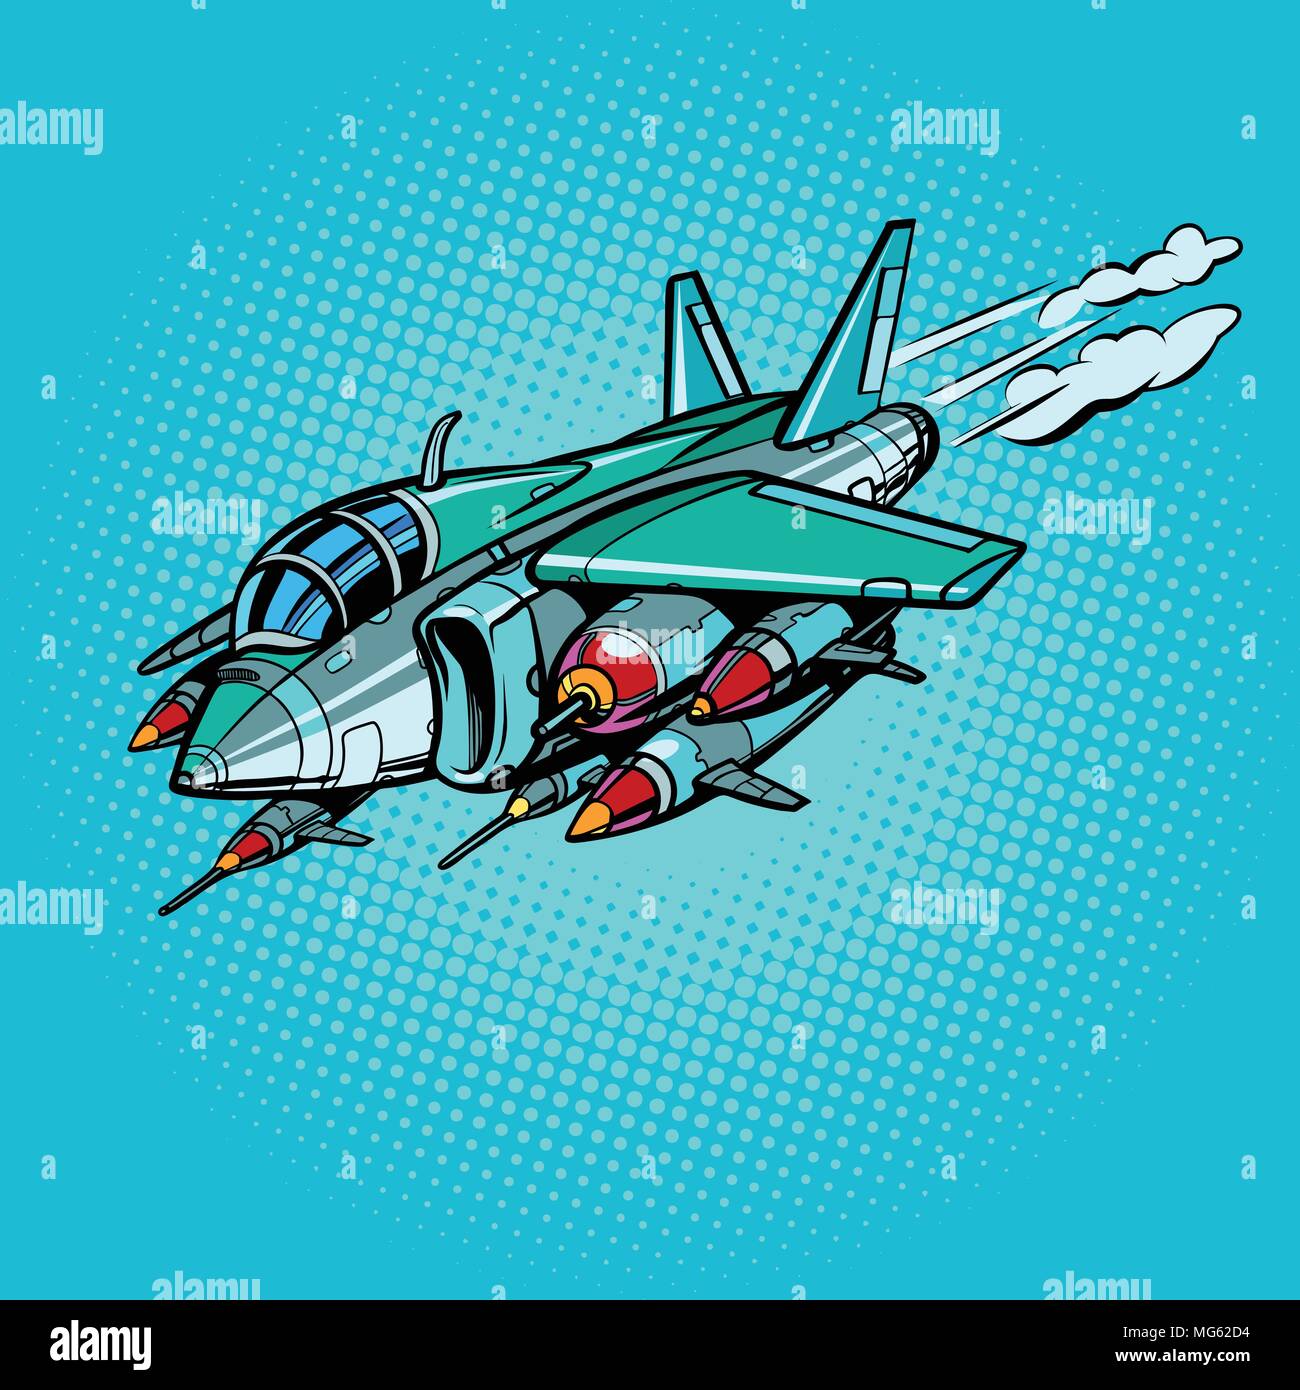 military assault aircraft with bombs and missiles. Comic cartoon pop art retro illustration vector kitsch drawing Stock Vector